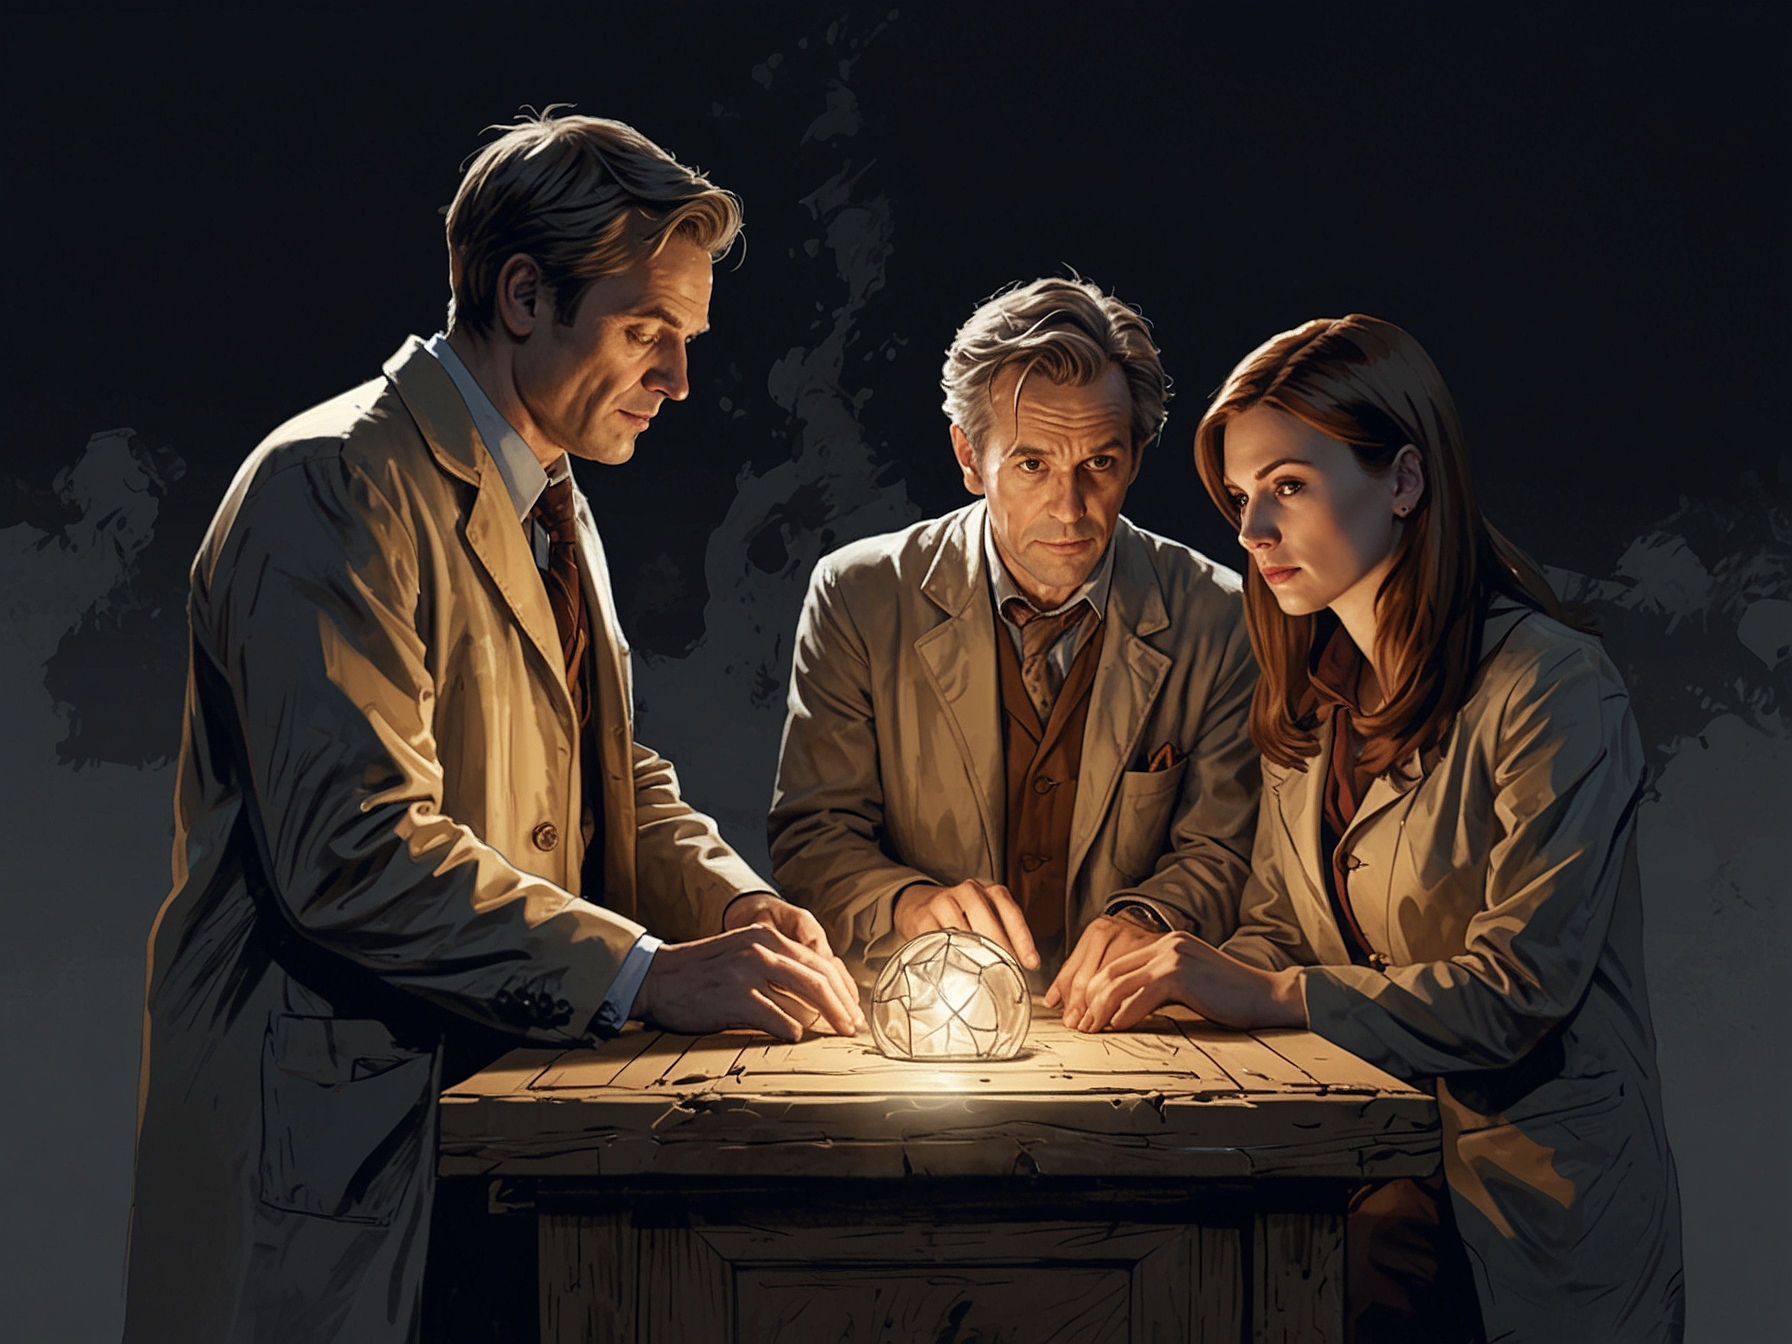 An illustration of the Doctor and companions pondering over a mysterious artifact, symbolizing the show's thematic focus on questions and the quest for knowledge.